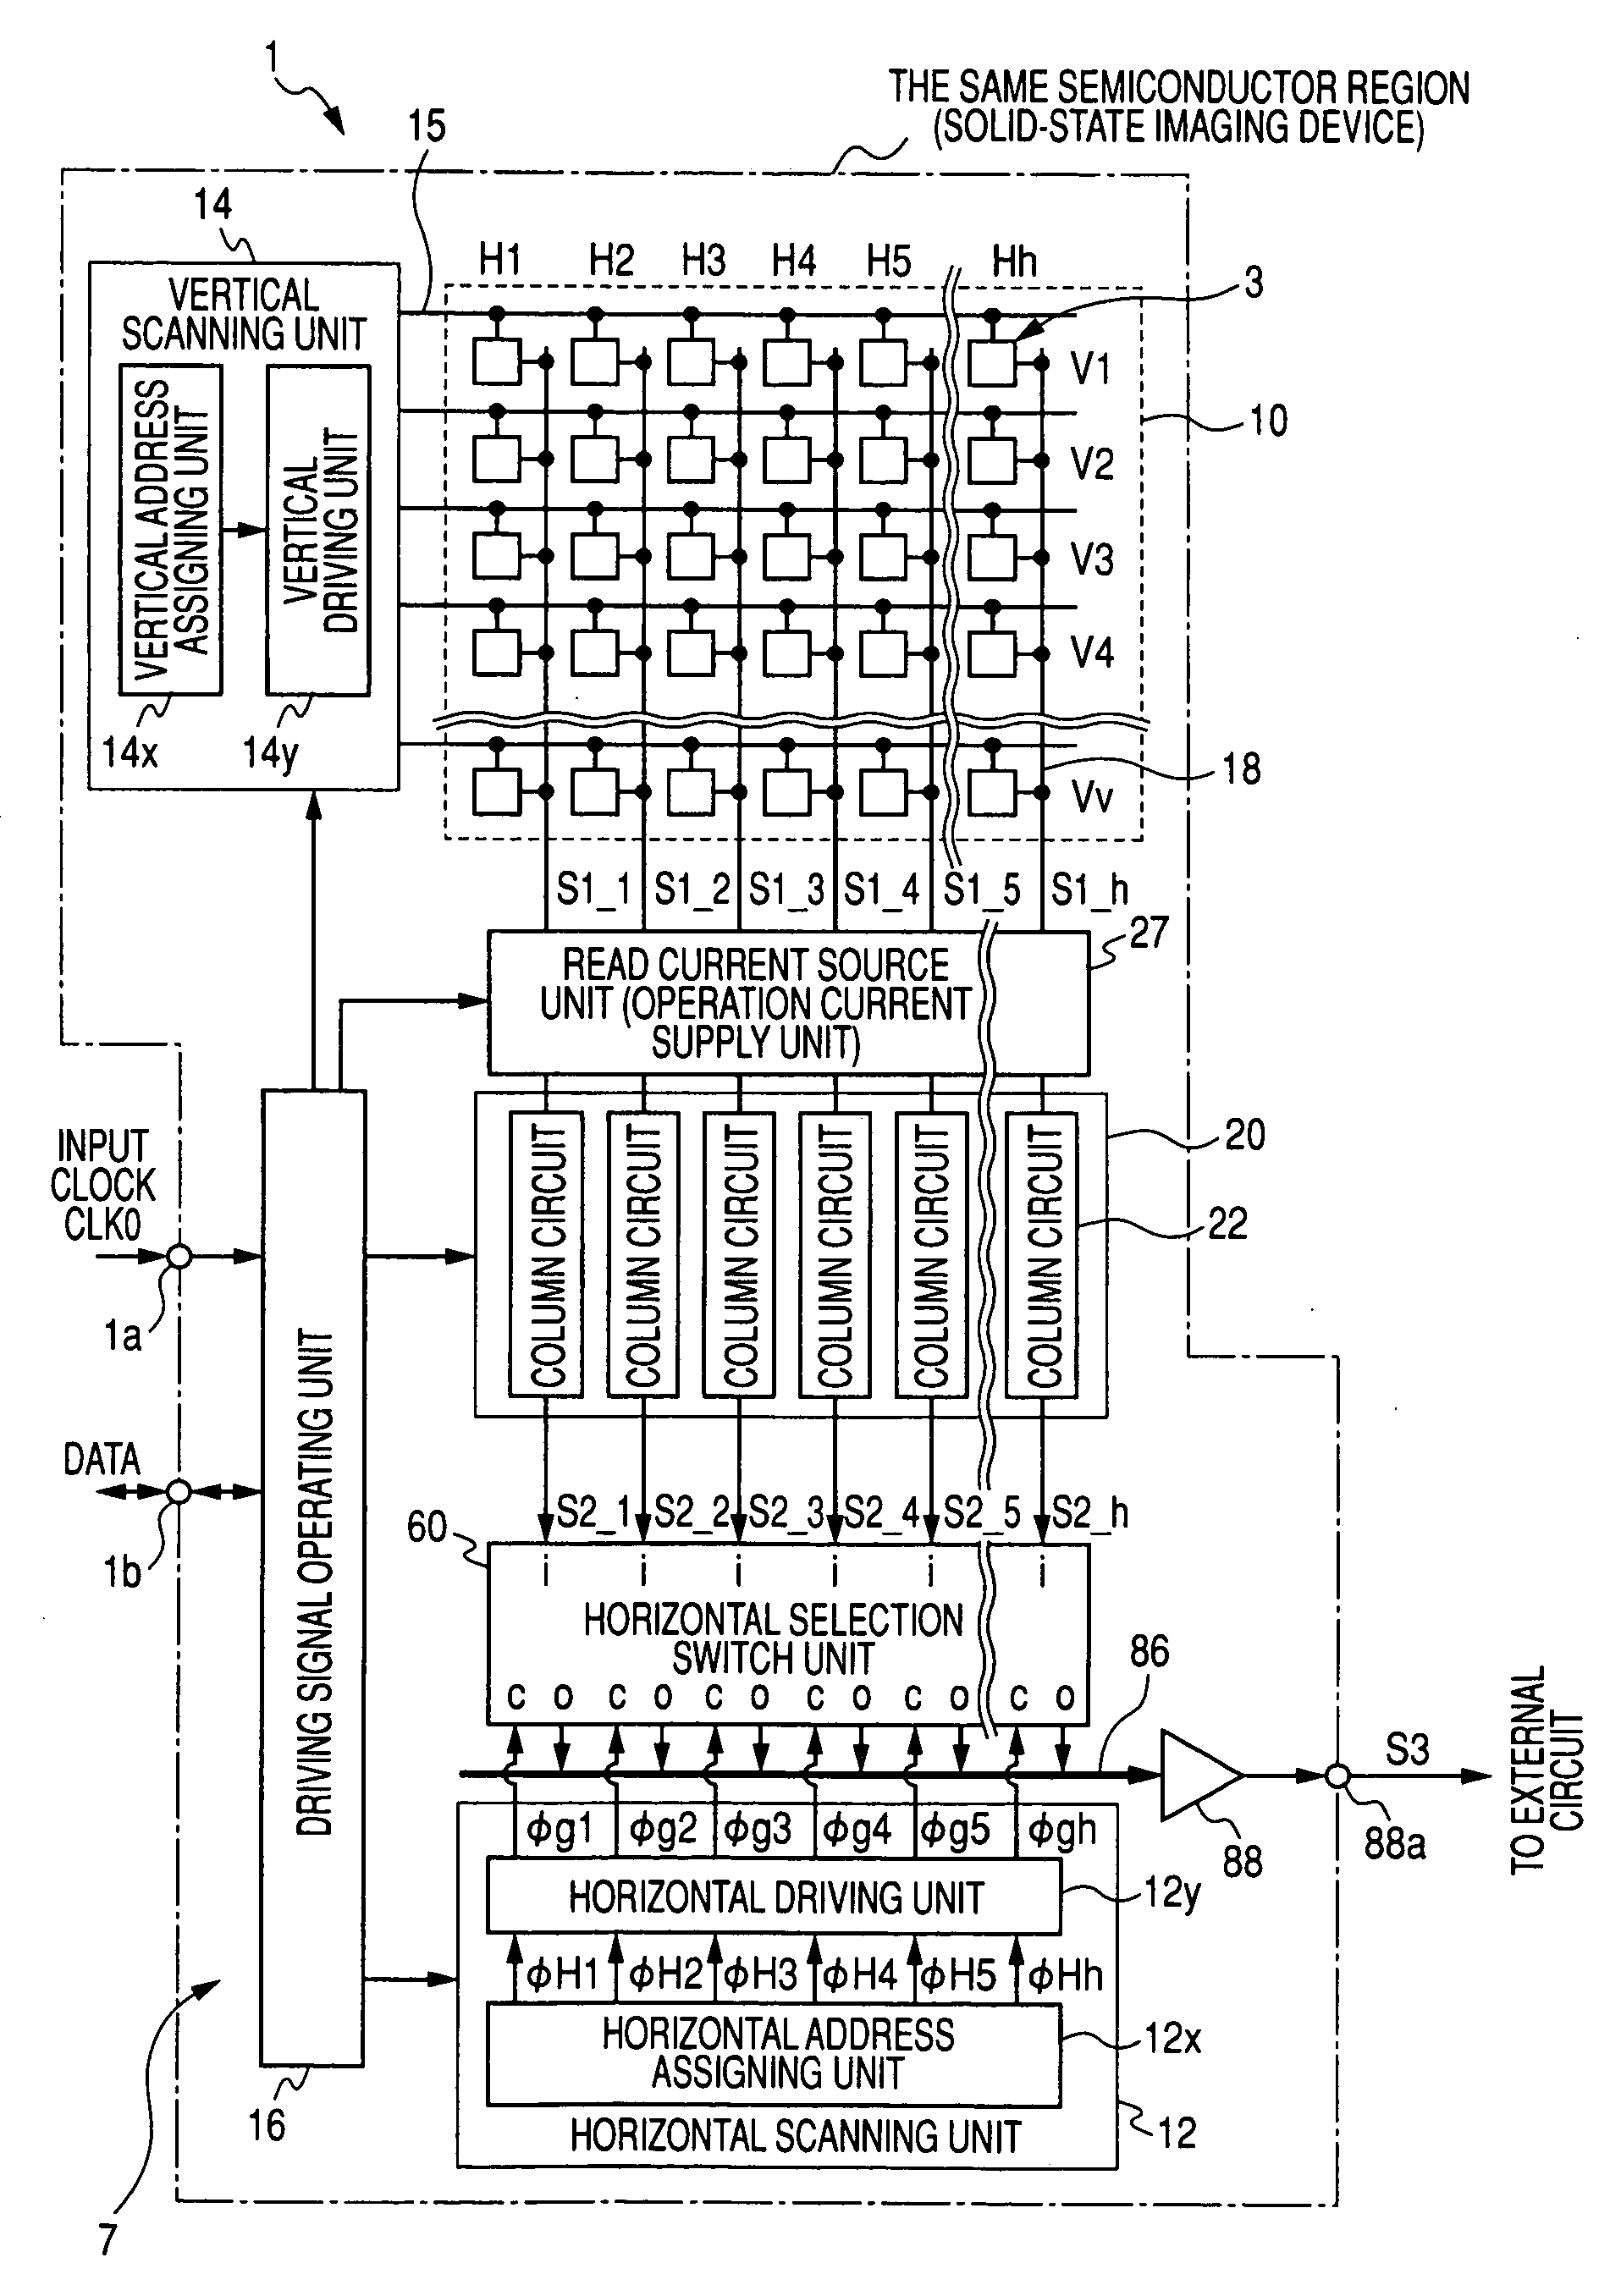 Method of acquiring physical information and physical information acquiring device